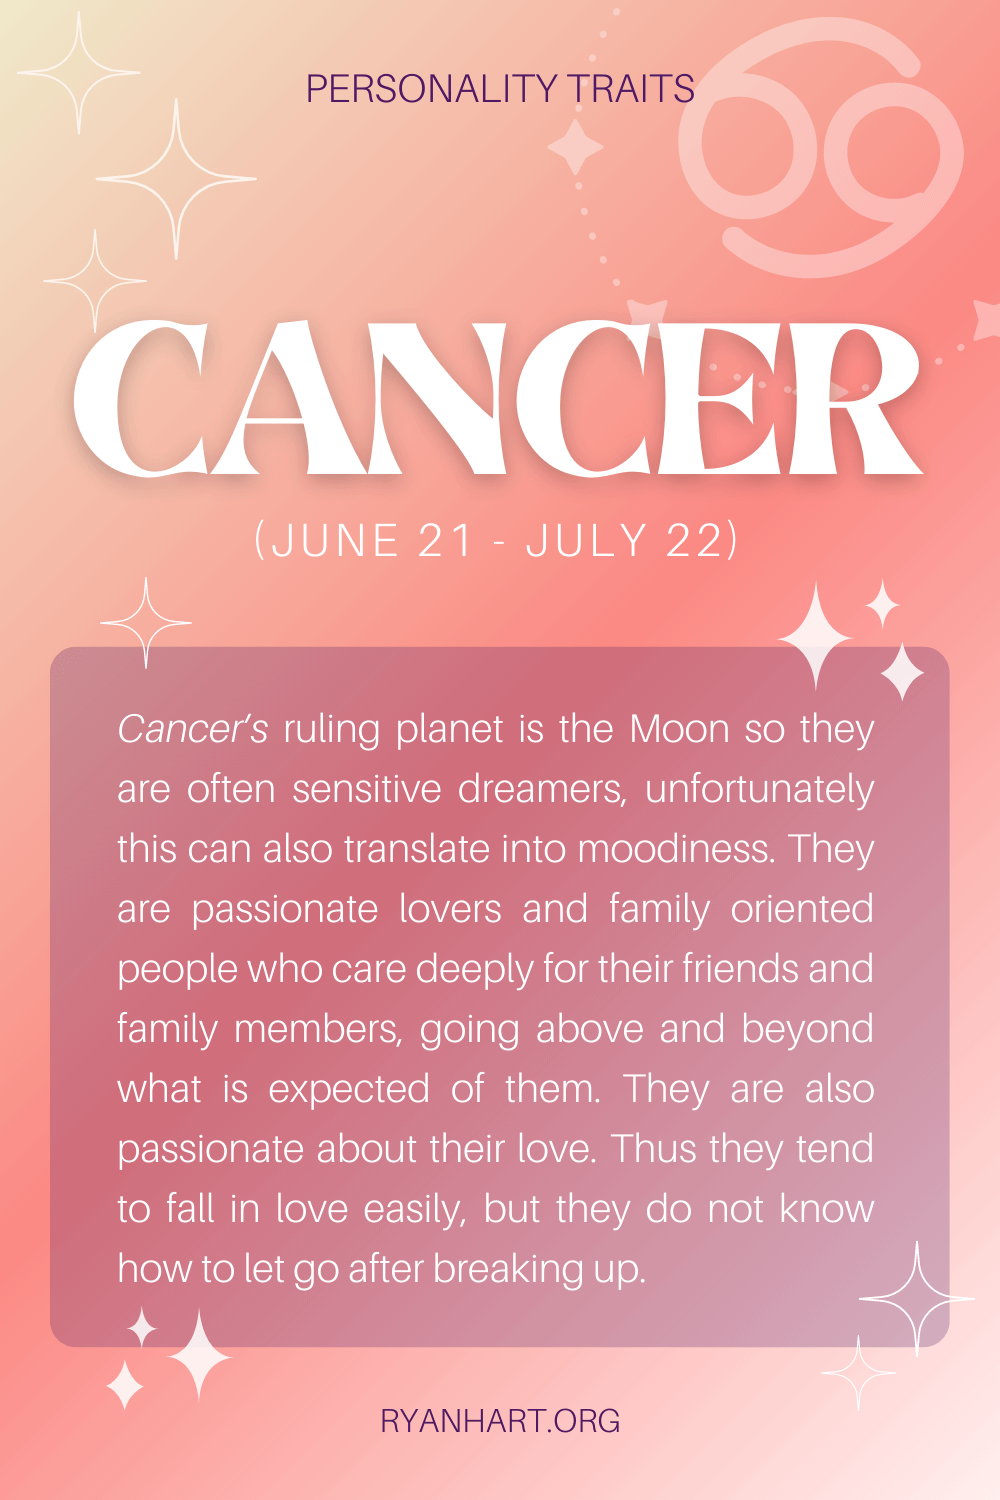 Cancer Personality Traits (Dates: June 21 - July 22)